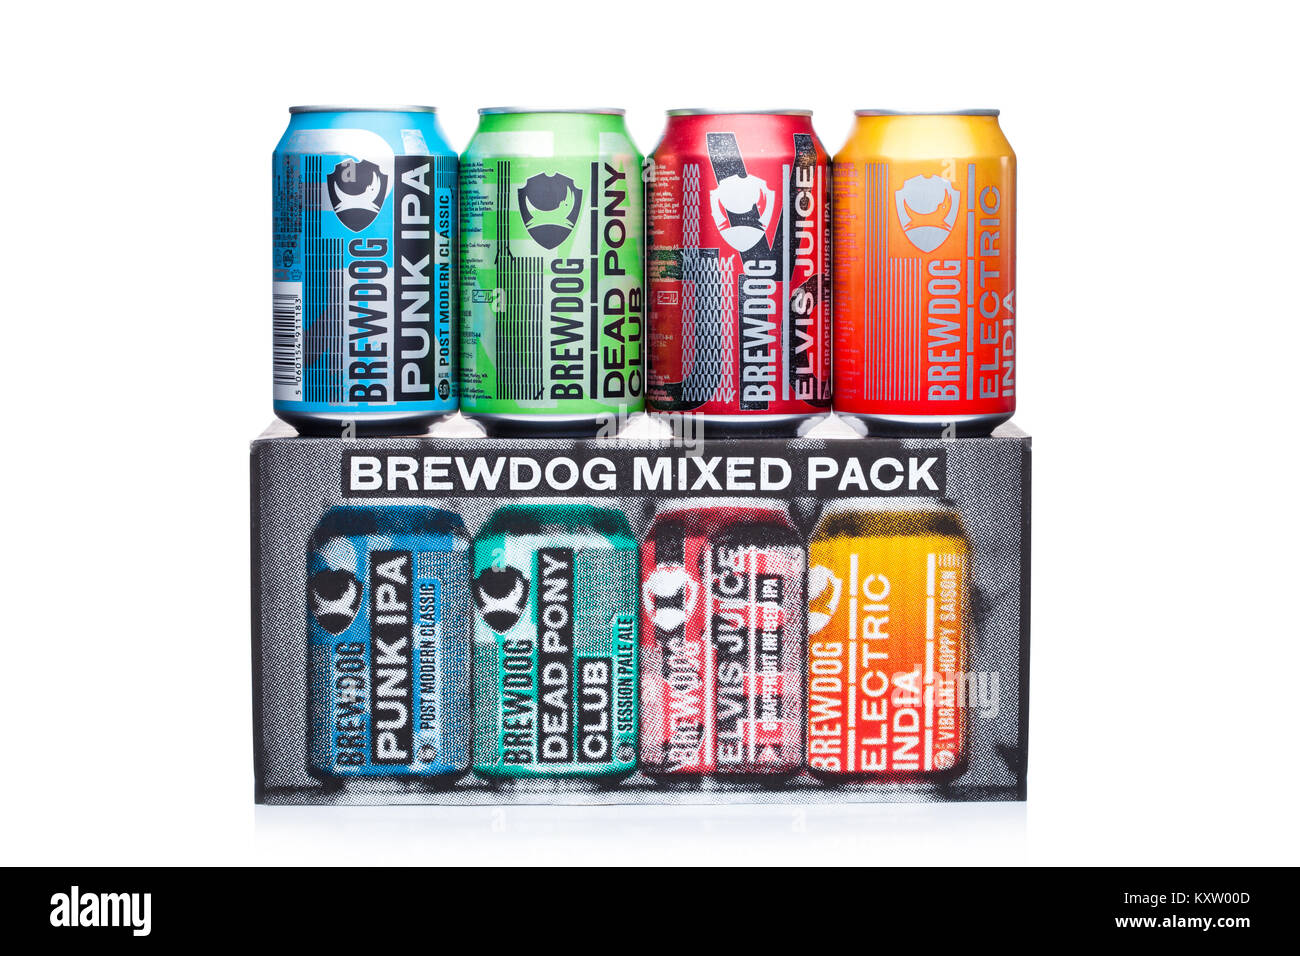 LONDON, UK - JANUARY 02, 2018: Aluminium cans of Brewdog  beer selection, from the Brewdog brewery on white background and mixed pack box. Stock Photo